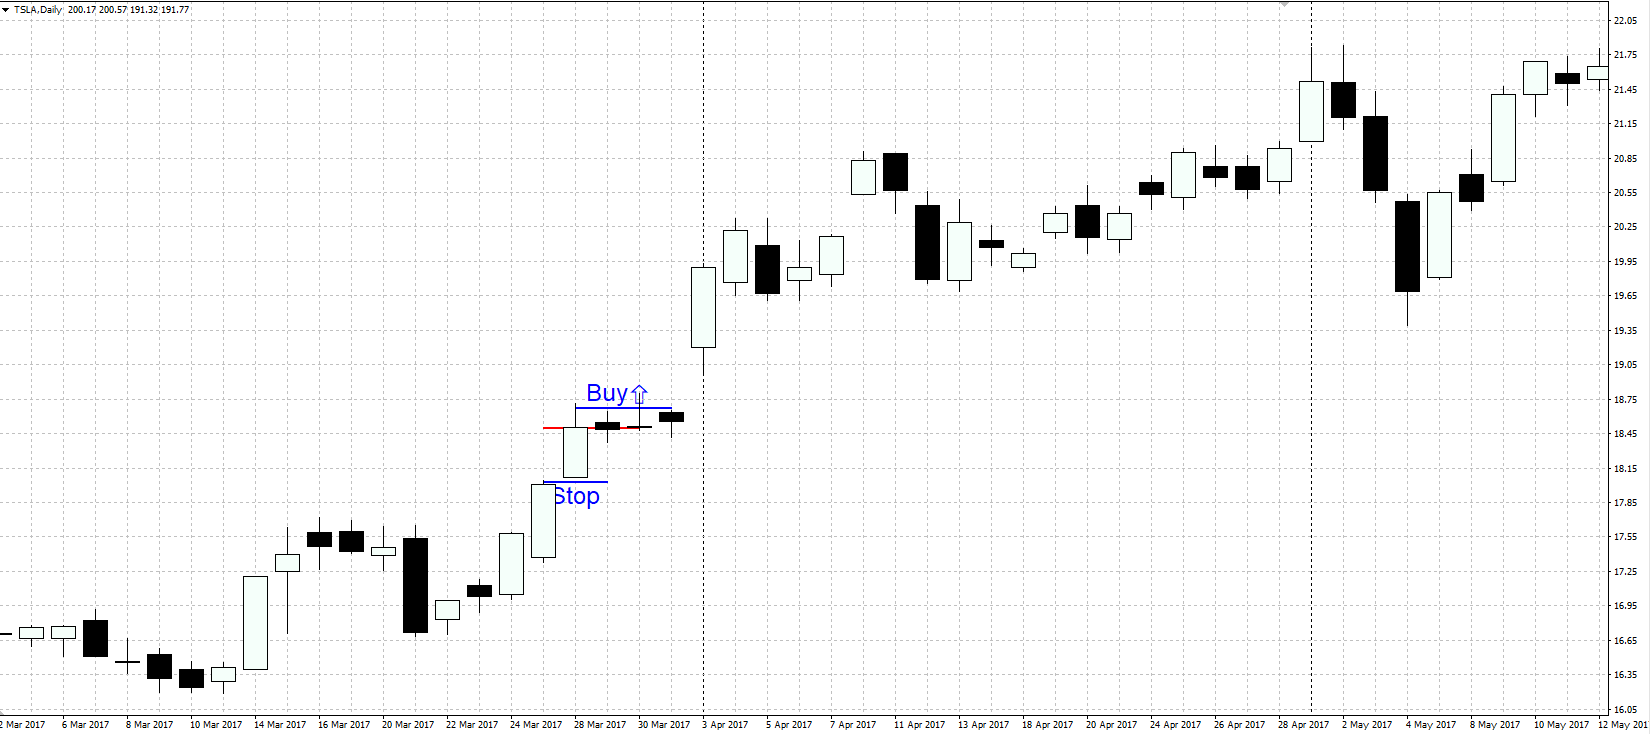 Example of a buy using the bullish "On neck" pattern